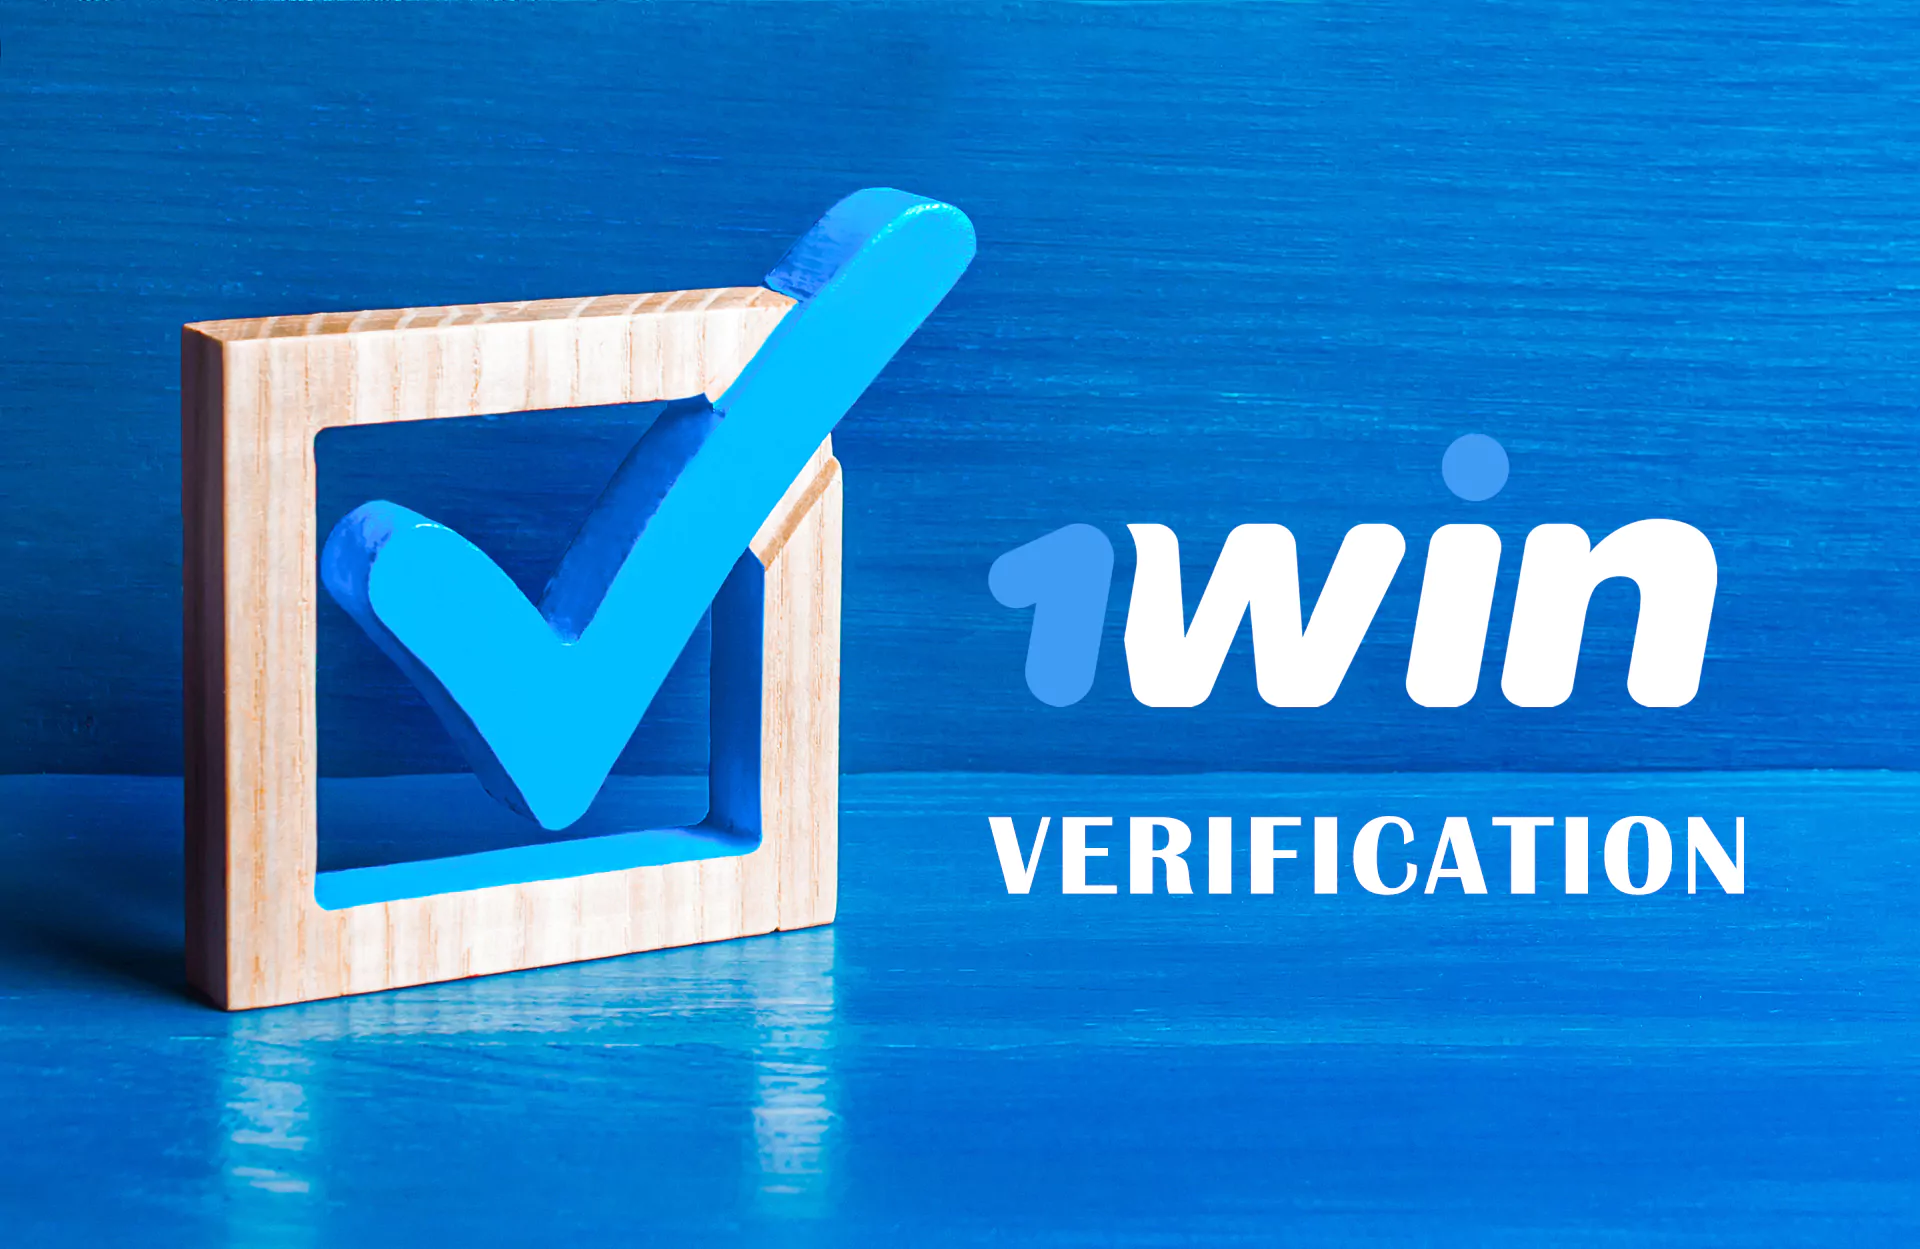 Verify the account with help of your real documents.